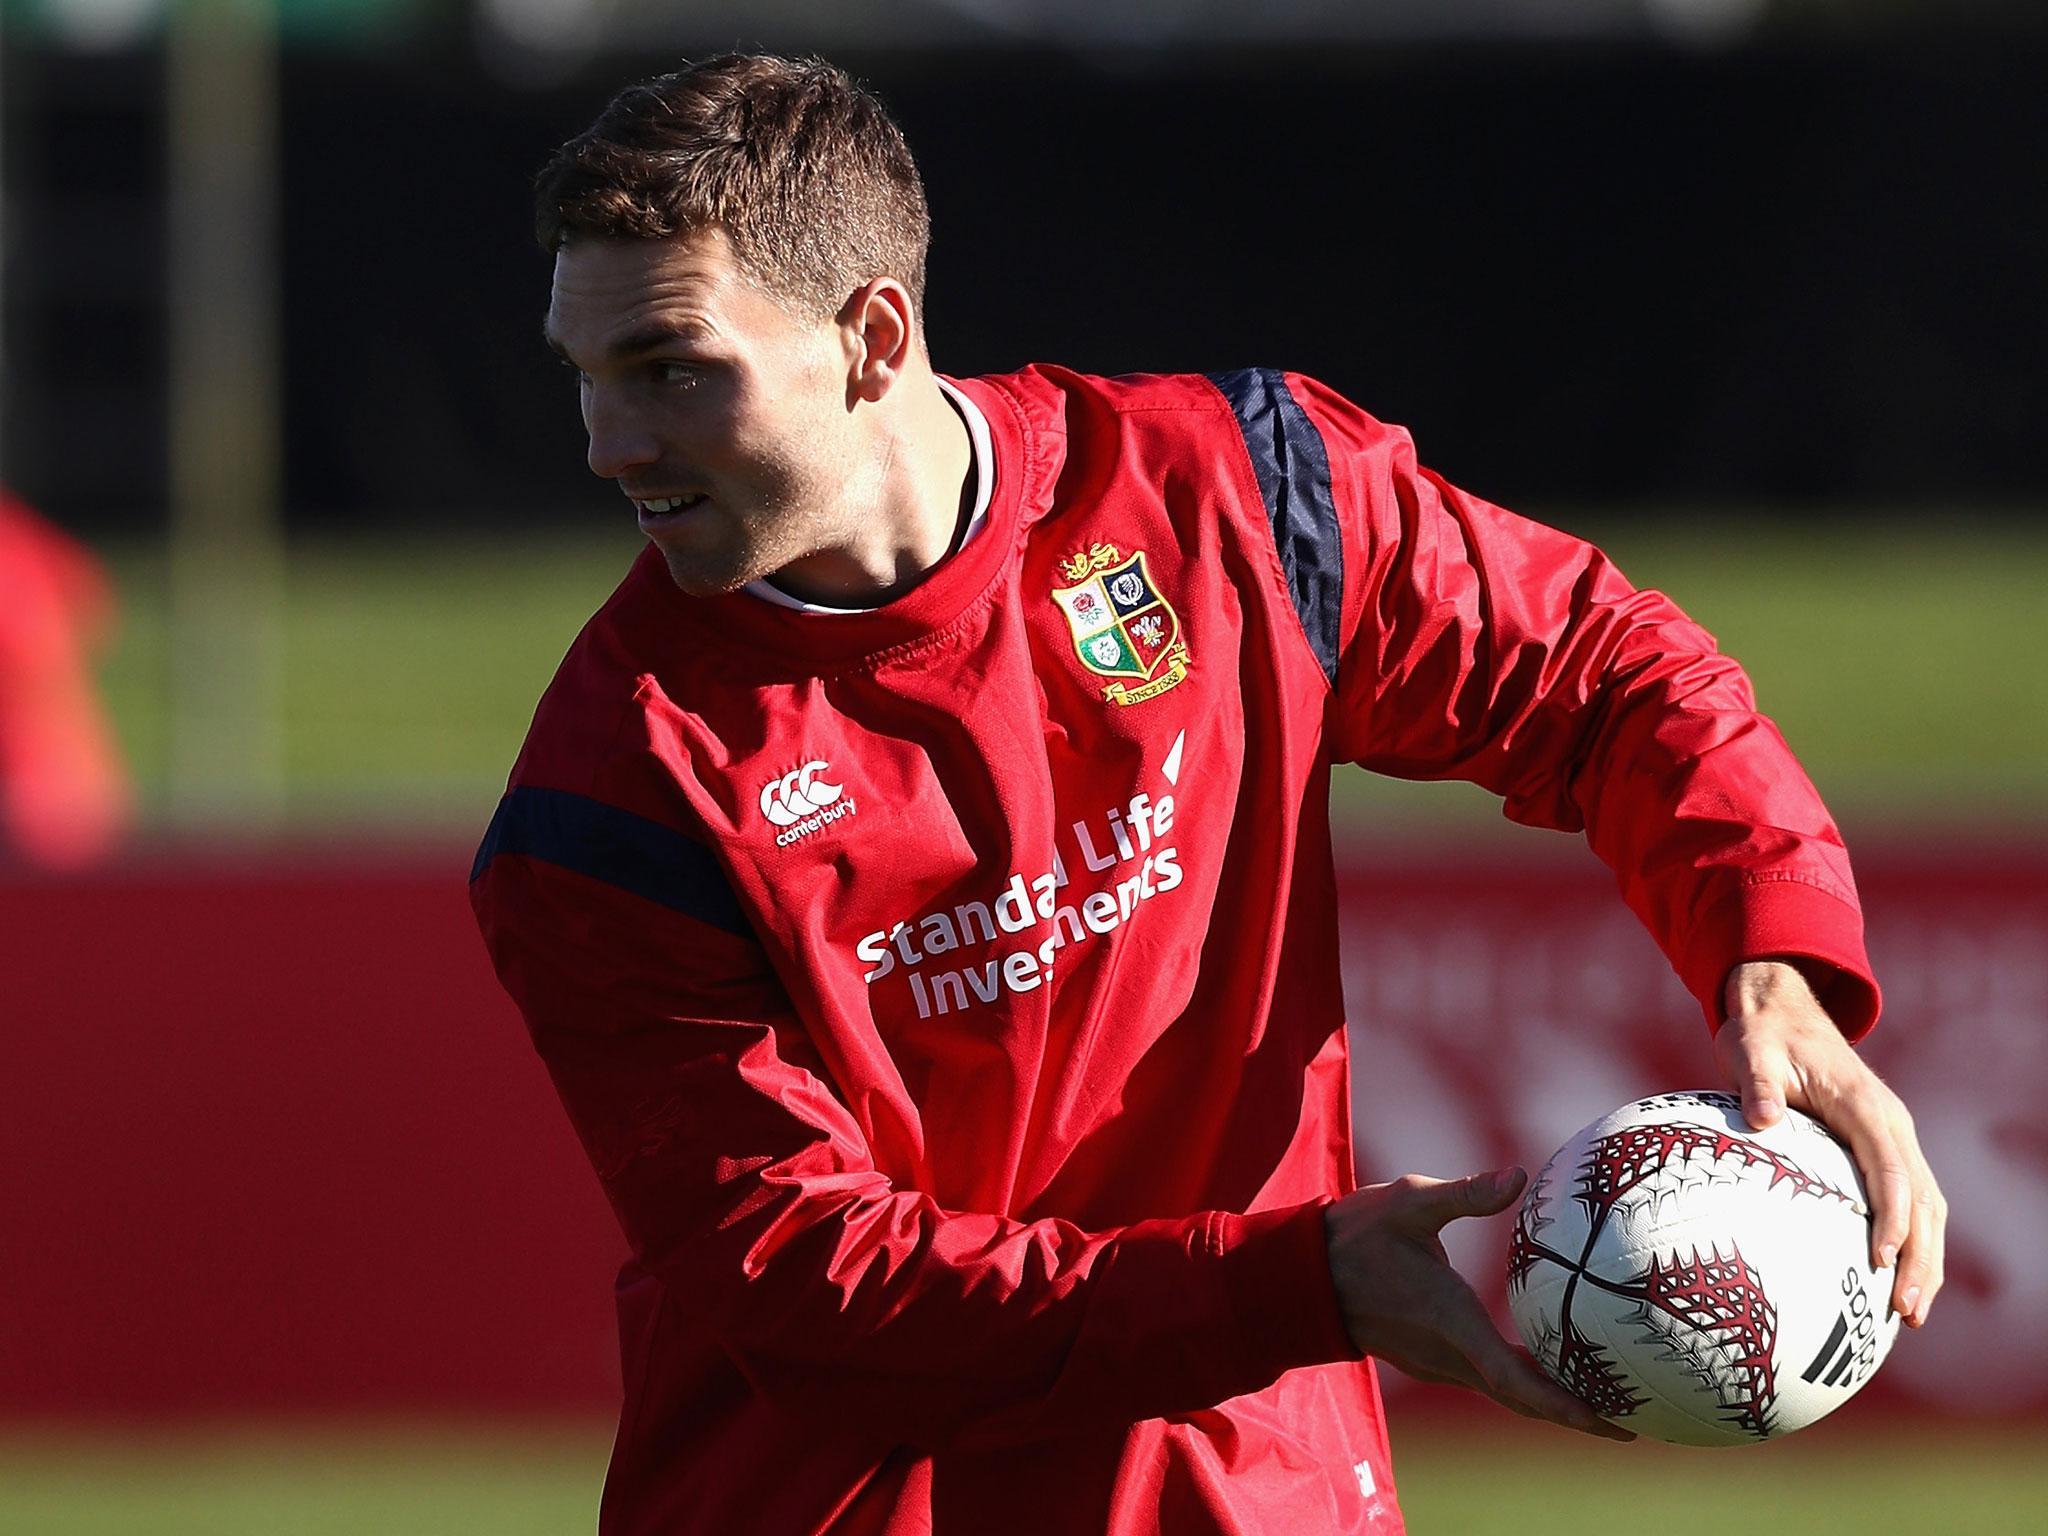 George North will get his first crack of the tour against the Crusaders